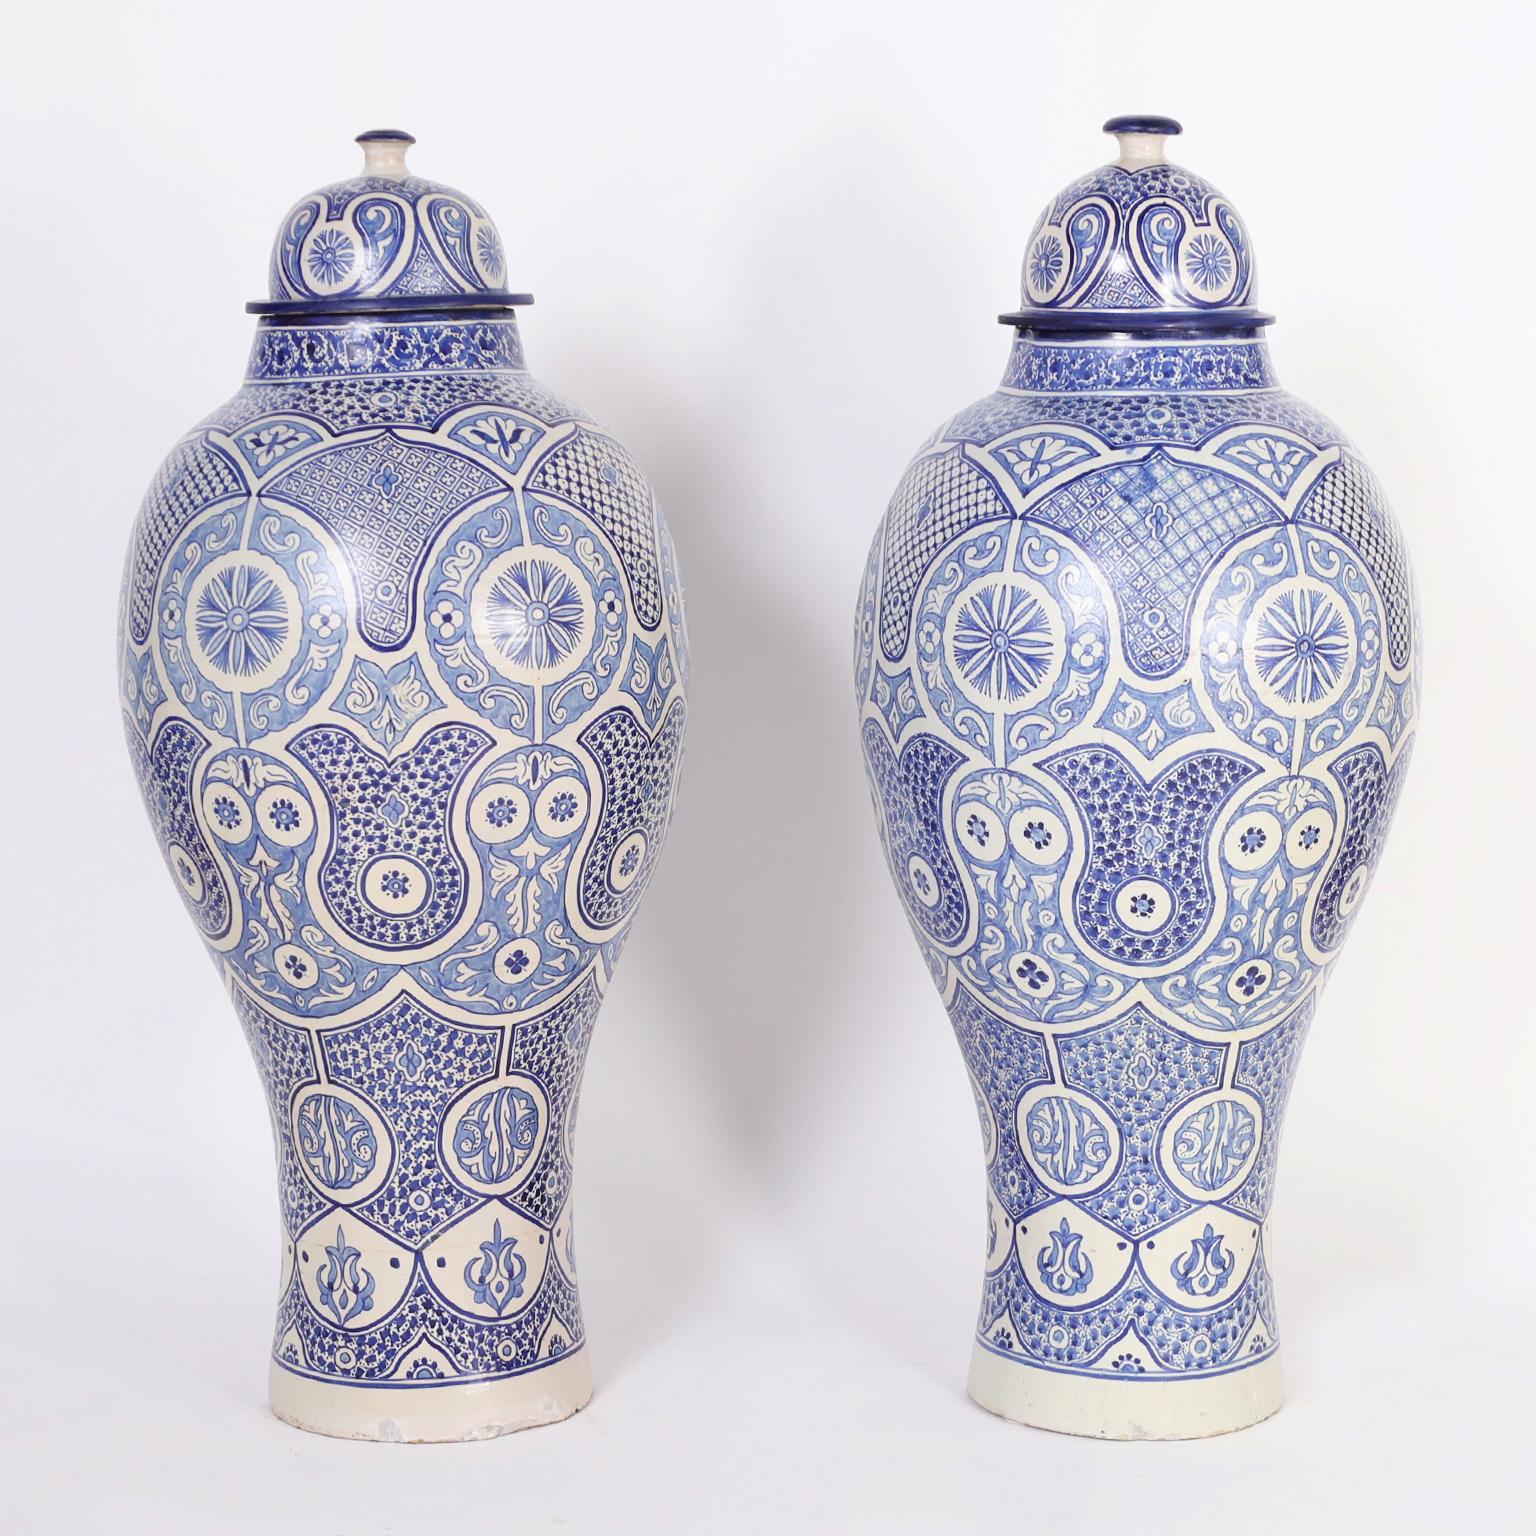 Impressive pair of vintage Moroccan palace size lidded urns crafted in terra cotta in classic form with distinctive hand decorated Mediterranean designs in alluring blue tones. 